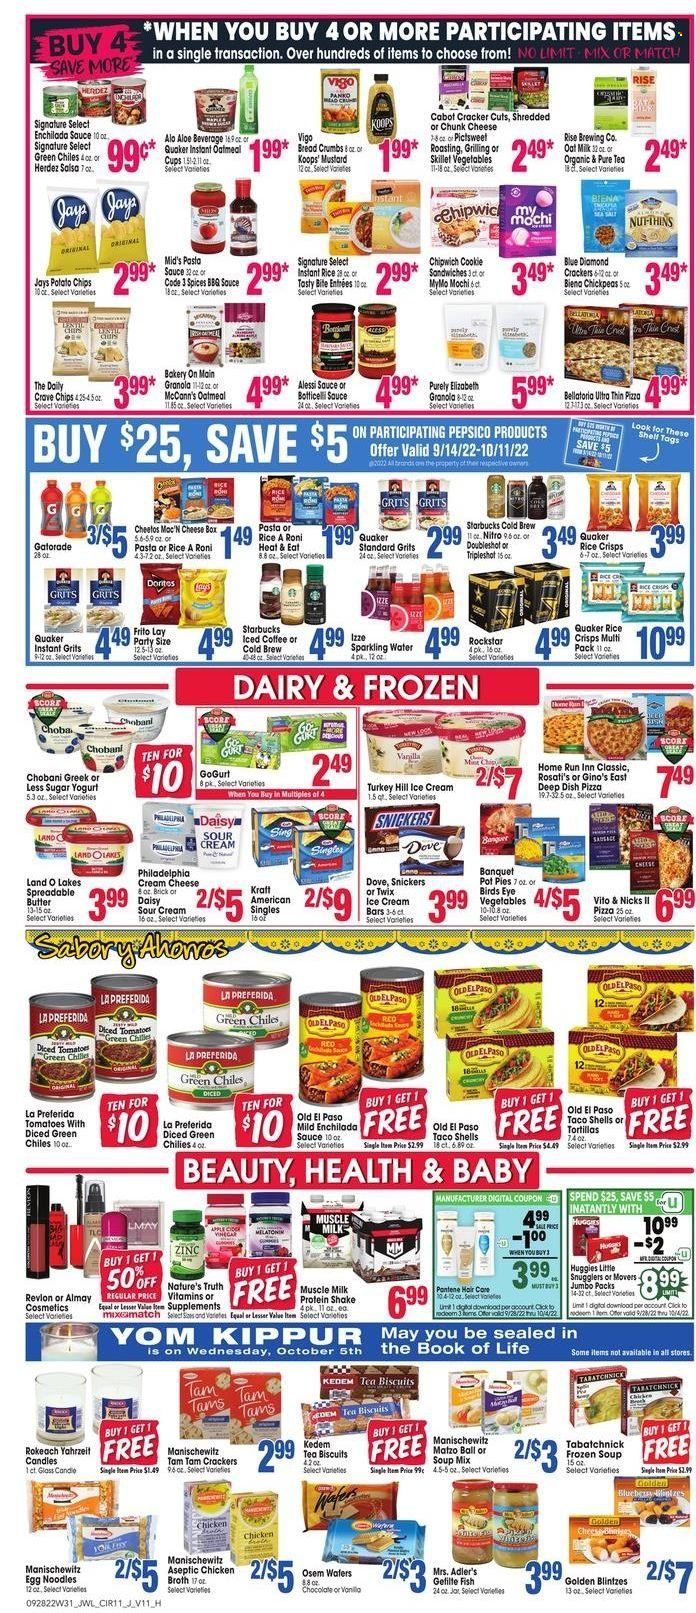 thumbnail - Jewel Osco Flyer - 09/28/2022 - 10/04/2022 - Sales products - tortillas, Old El Paso, pot pie, breadcrumbs, panko breadcrumbs, fish, pizza, soup mix, soup, Quaker, noodles, Kraft®, sausage, cream cheese, Philadelphia, Kraft Singles, chunk cheese, yoghurt, Chobani, protein drink, shake, muscle milk, oat milk, butter, spreadable butter, sour cream, ice cream, ice cream bars, Bellatoria, Dove, wafers, Snickers, Twix, crackers, biscuit, potato chips, Cheetos, rice crisps, chicken broth, oatmeal, grits, broth, enchilada sauce, diced tomatoes, granola, rice, chickpeas, egg noodles, BBQ sauce, mustard, salsa, Blue Diamond, Kedem, Rockstar, Gatorade, sparkling water, iced coffee, Starbucks, Huggies, Crest, Almay, Revlon, Pantene, cup, candle, glass candle, Nature's Truth, zinc. Page 10.